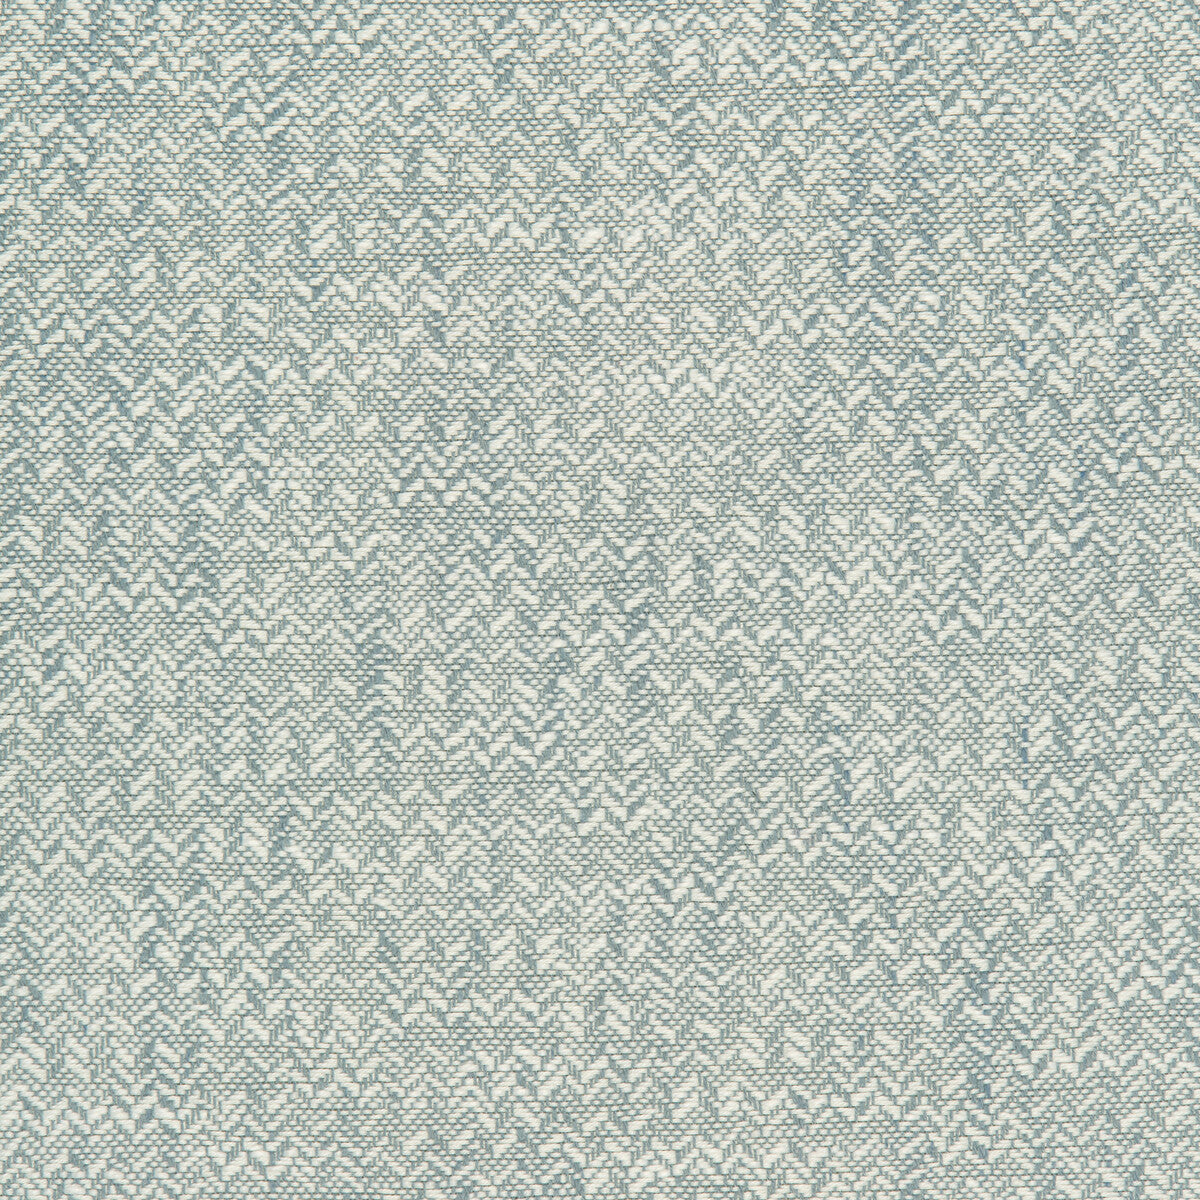 Kravet Design fabric in 36089-15 color - pattern 36089.15.0 - by Kravet Design in the Inside Out Performance Fabrics collection